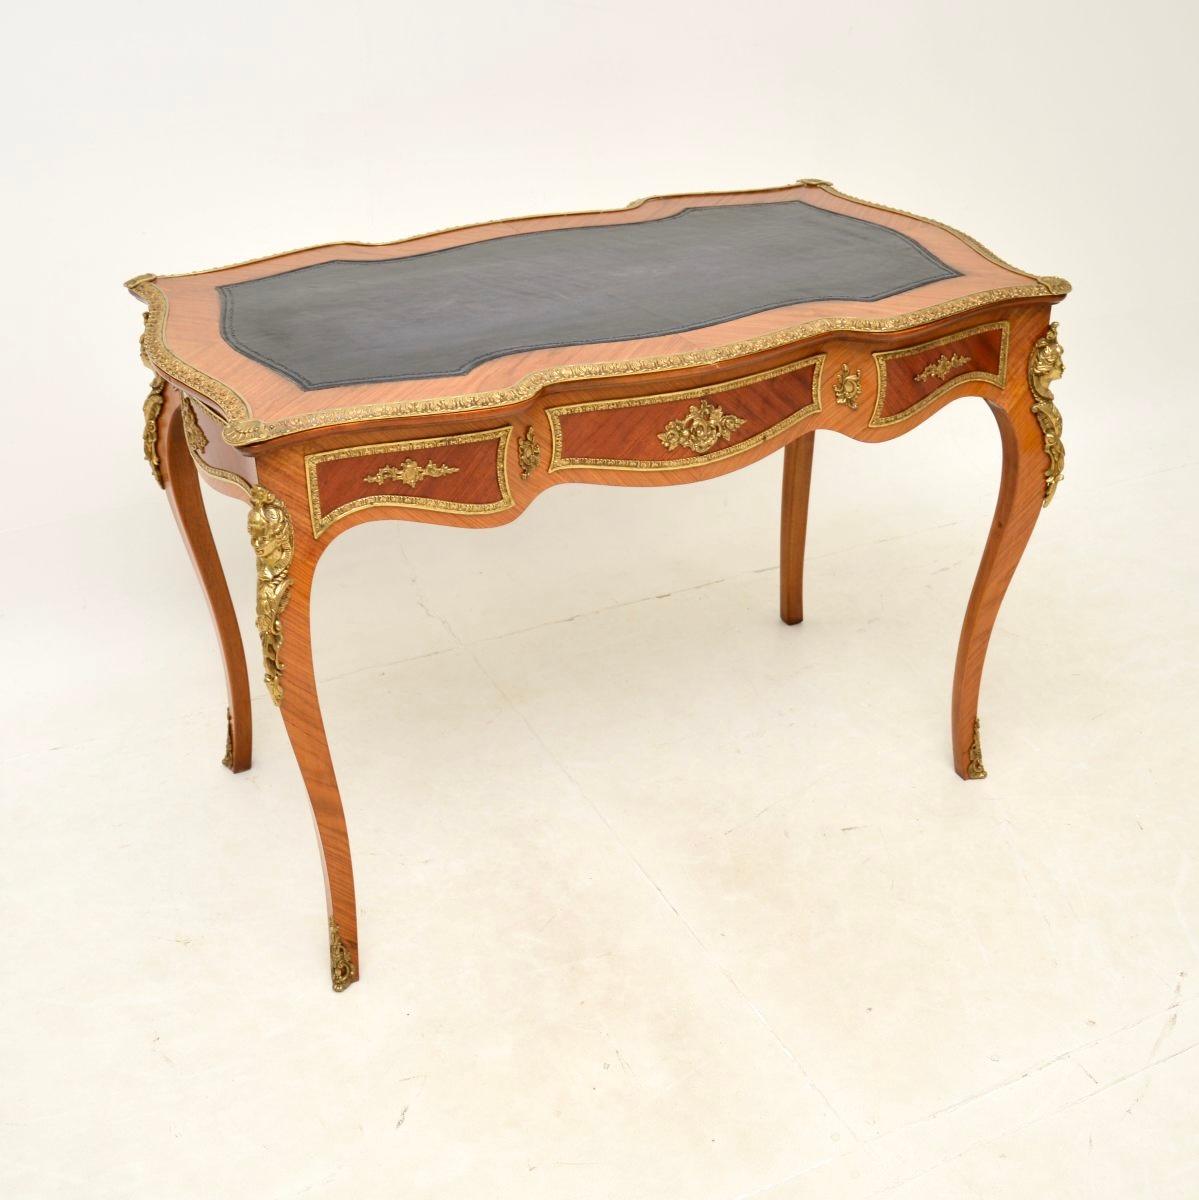 A stunning antique French leather top bureau plat desk, made in France and dating from around the 1930’s.

This is of outstanding quality, with beautifully cast ormolu mounts throughout. The wood is walnut, which has a gorgeous colour tone and grain